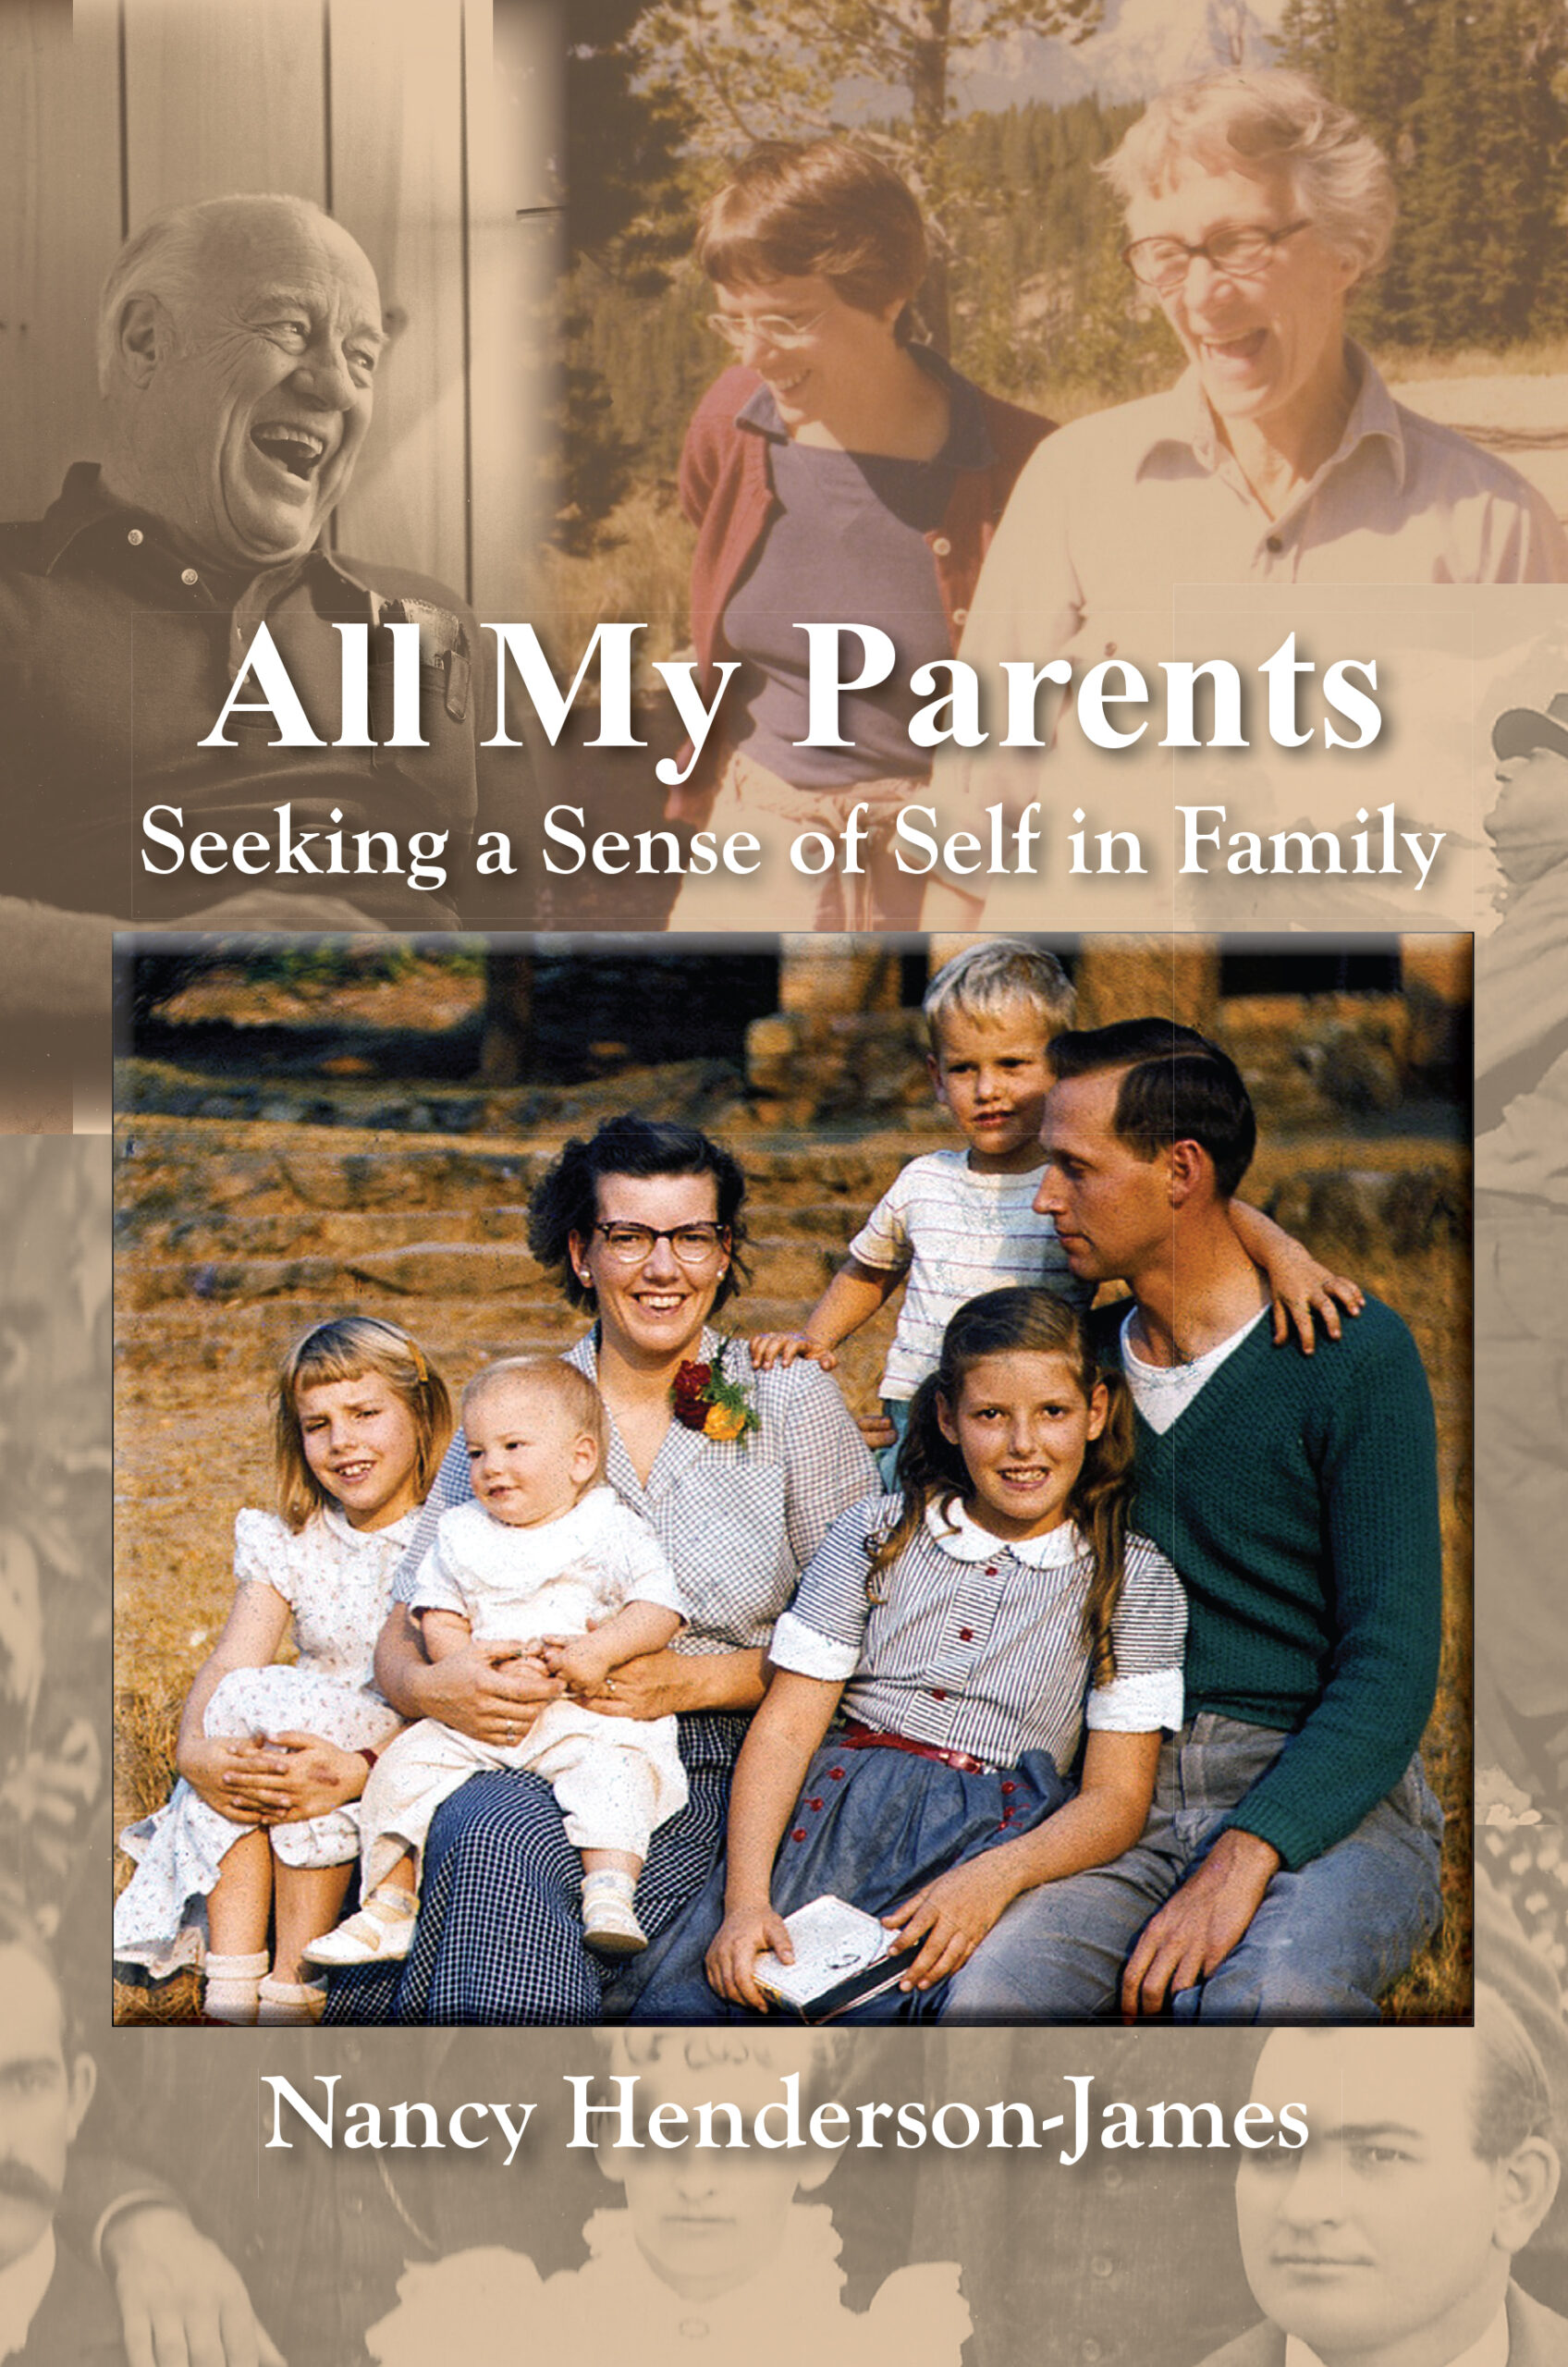 All My Parents by Nancy Henderson-James book cover